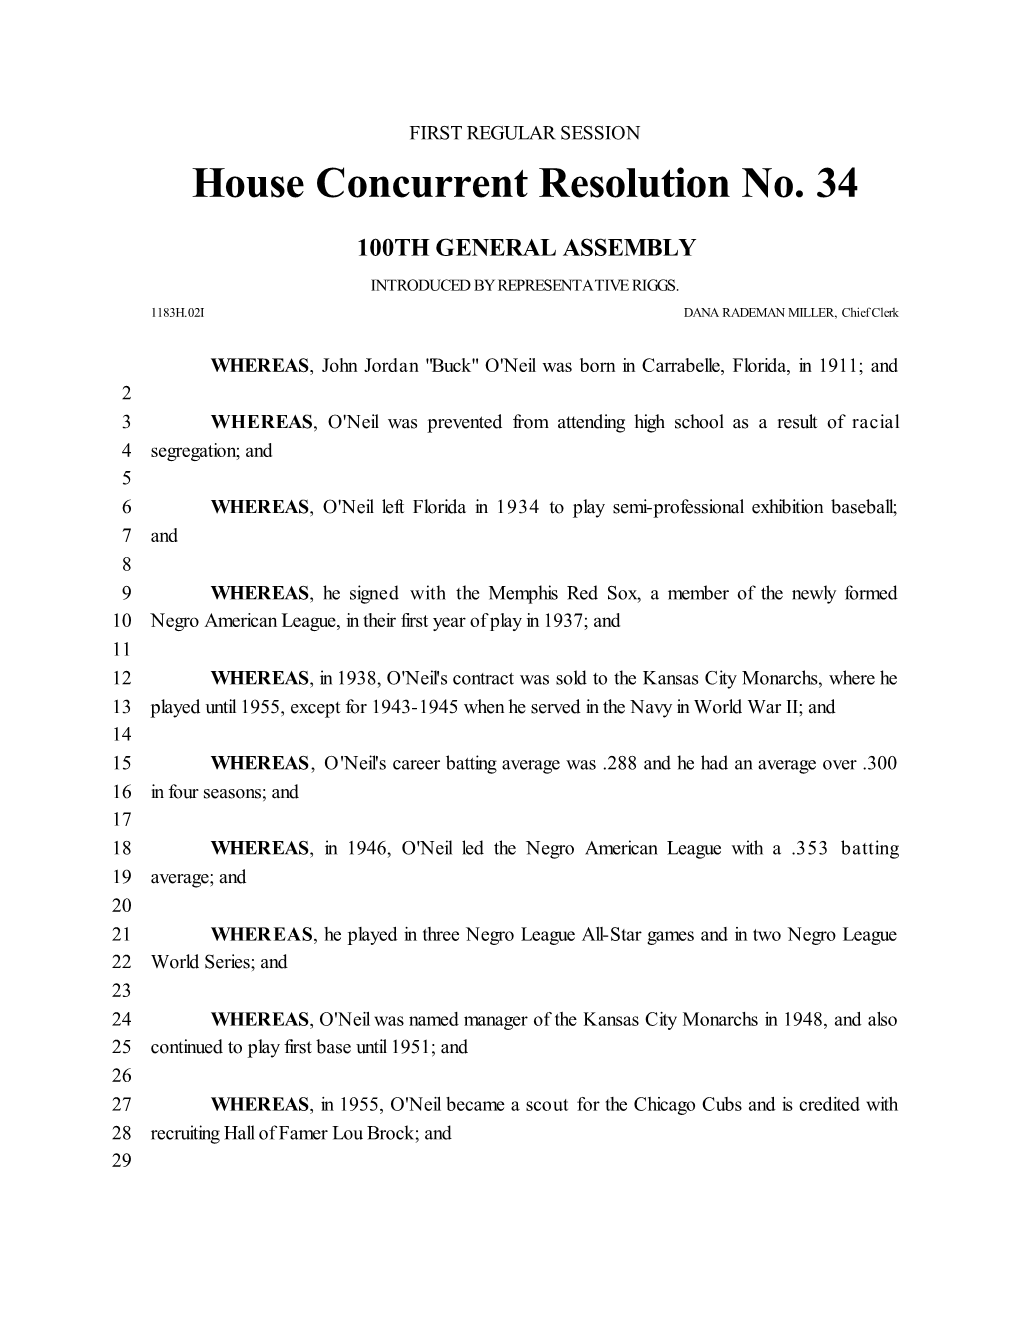 House Concurrent Resolution No. 34